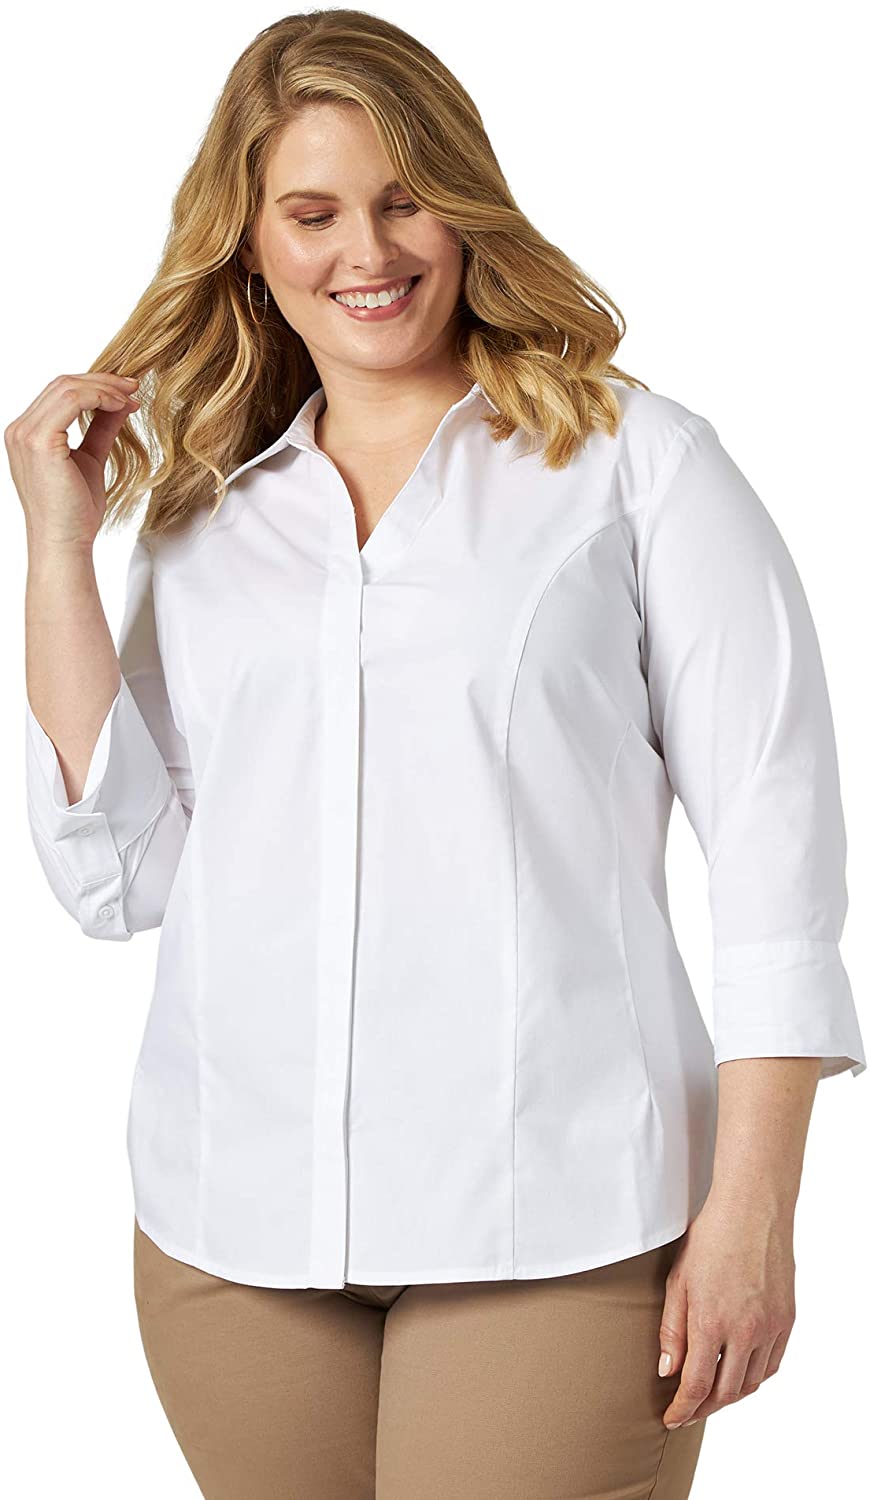 Price:$17.99 Riders by Lee Indigo Women's Plus Size Easy Care ¾ Sleeve Woven Shirt at Amazon Women’s Clothing store